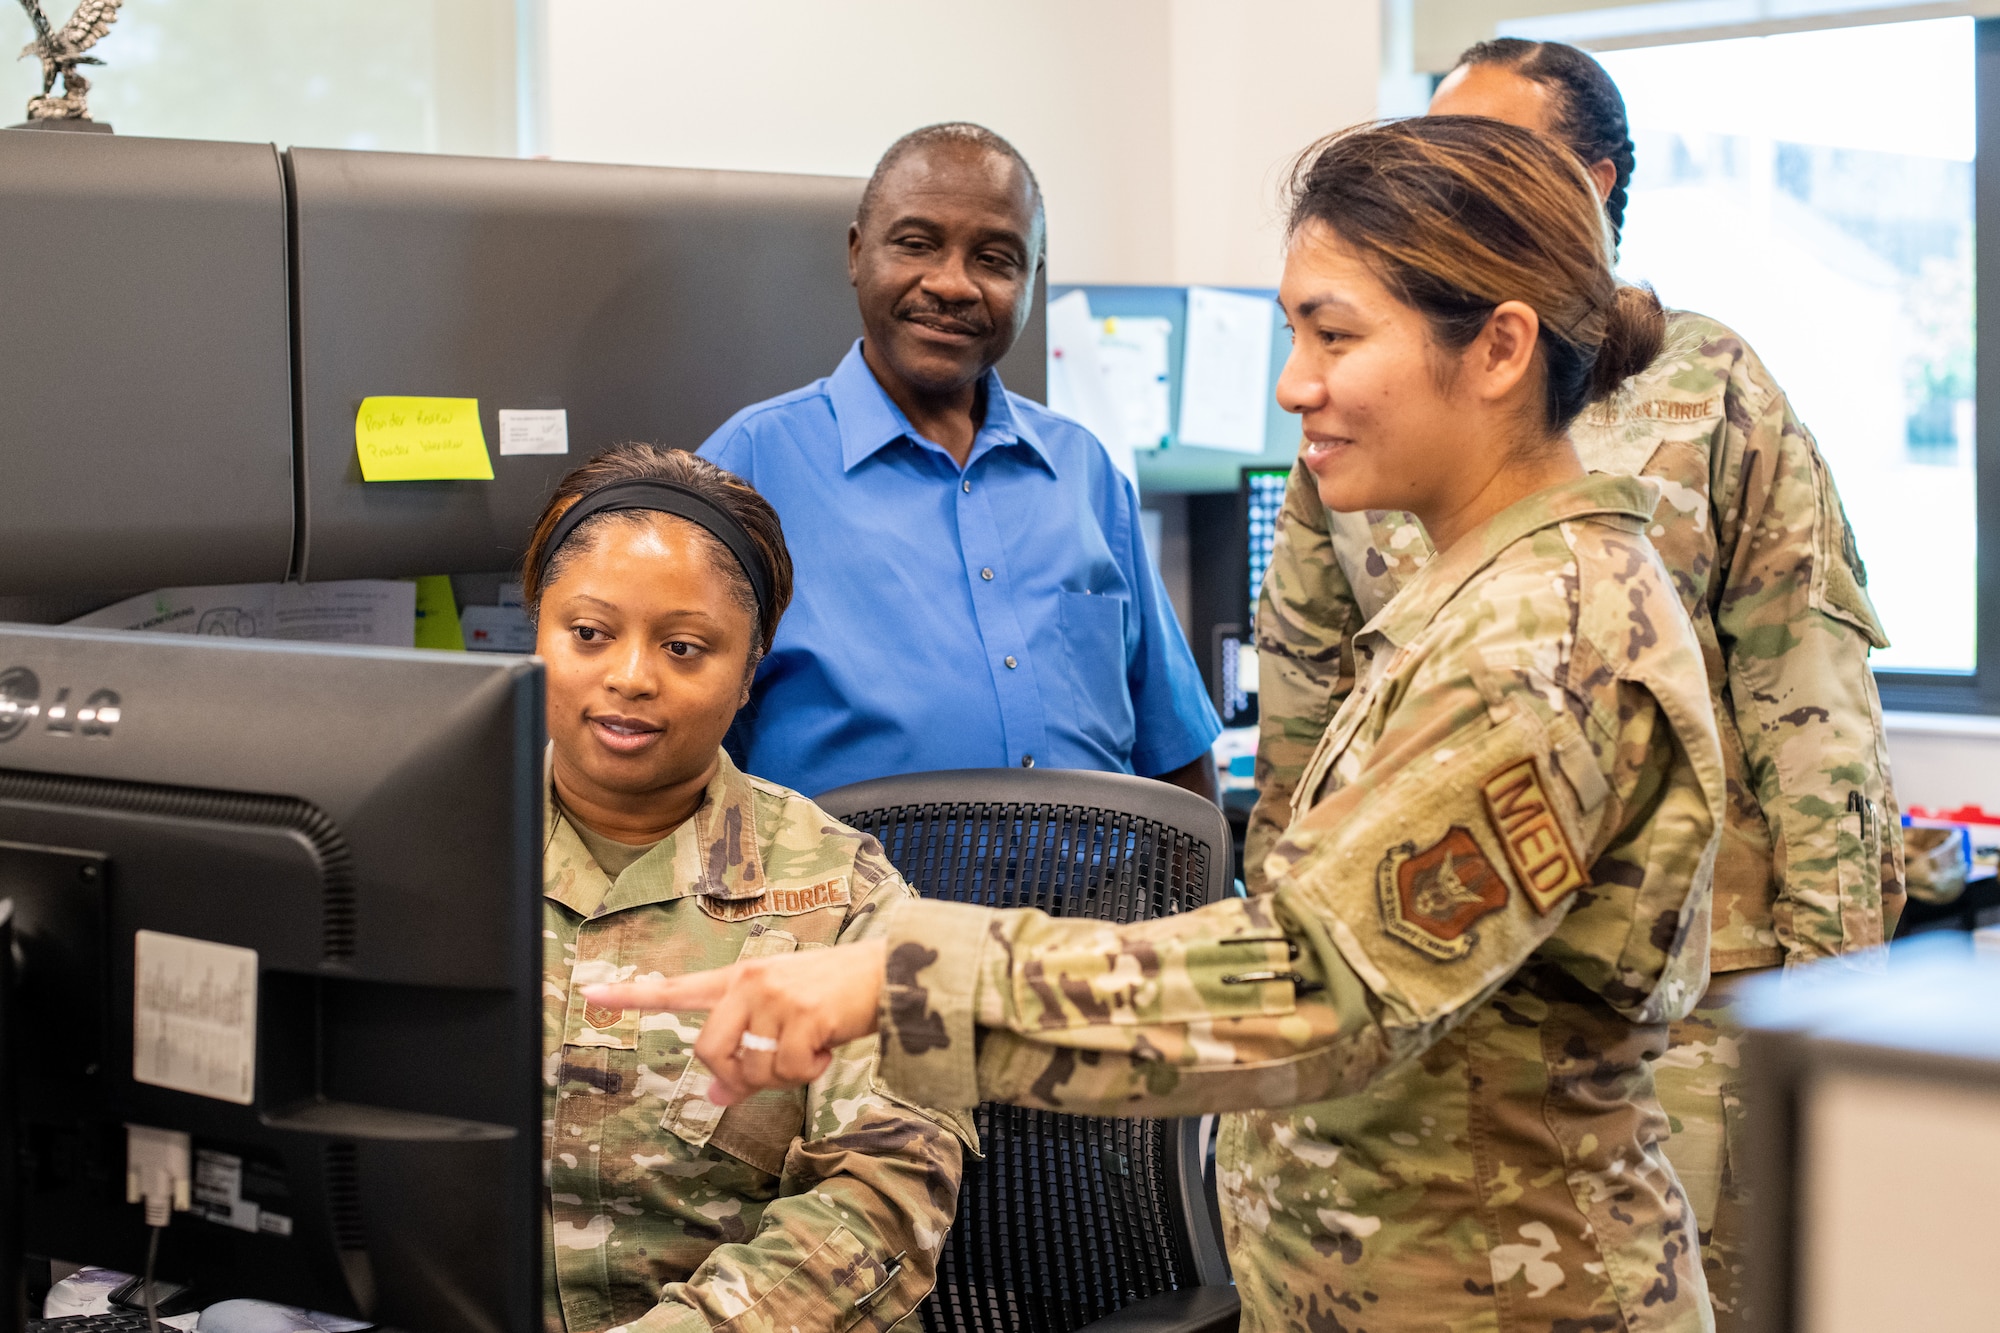 One Airman sits at a computer while three others stand around her